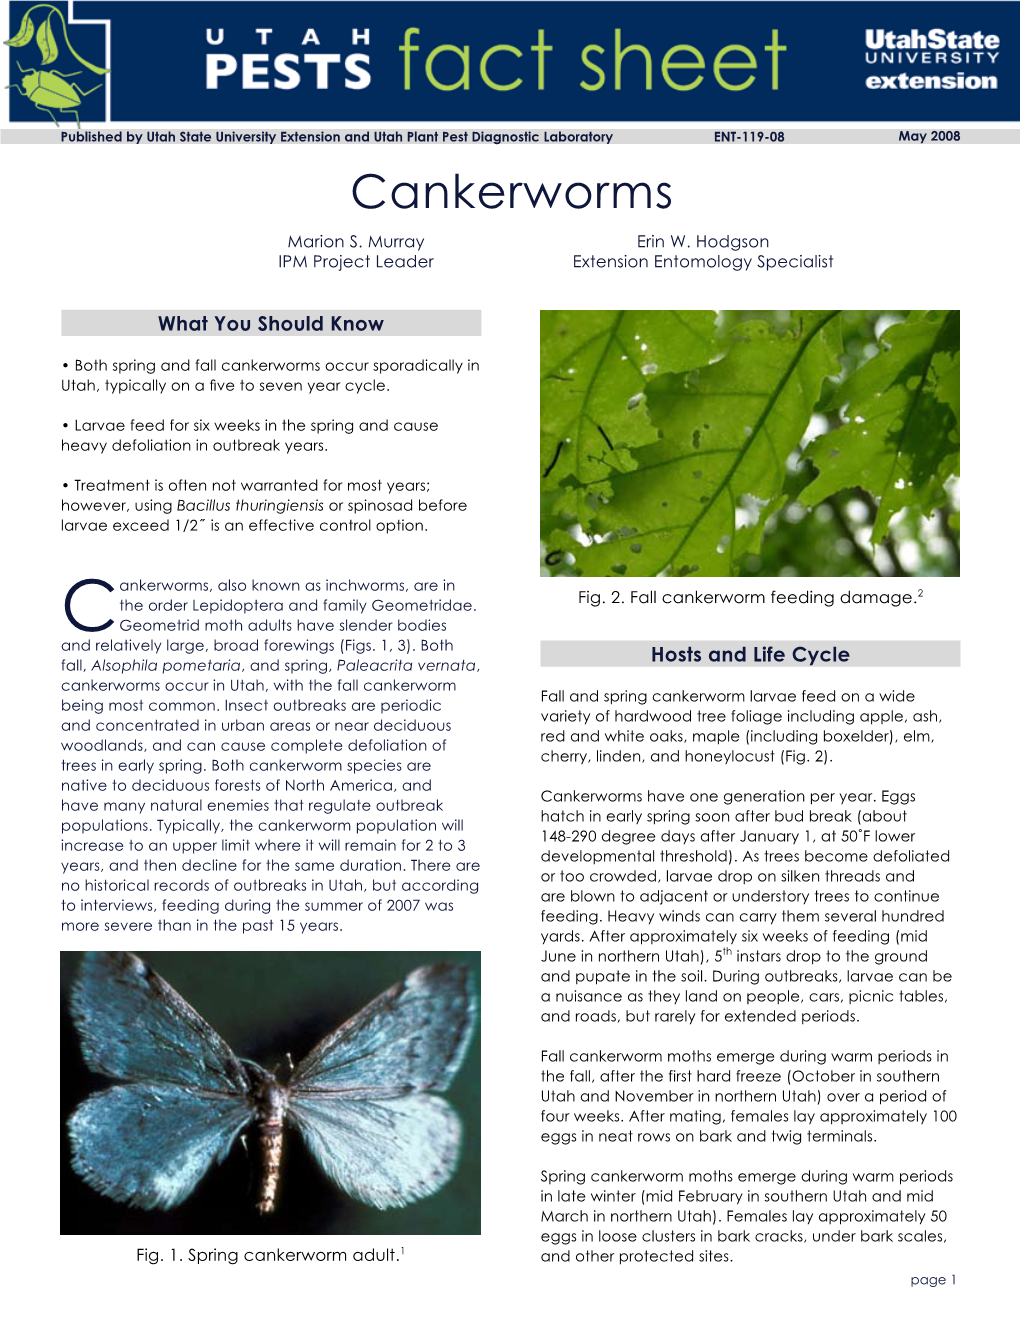 Cankerworms Marion S